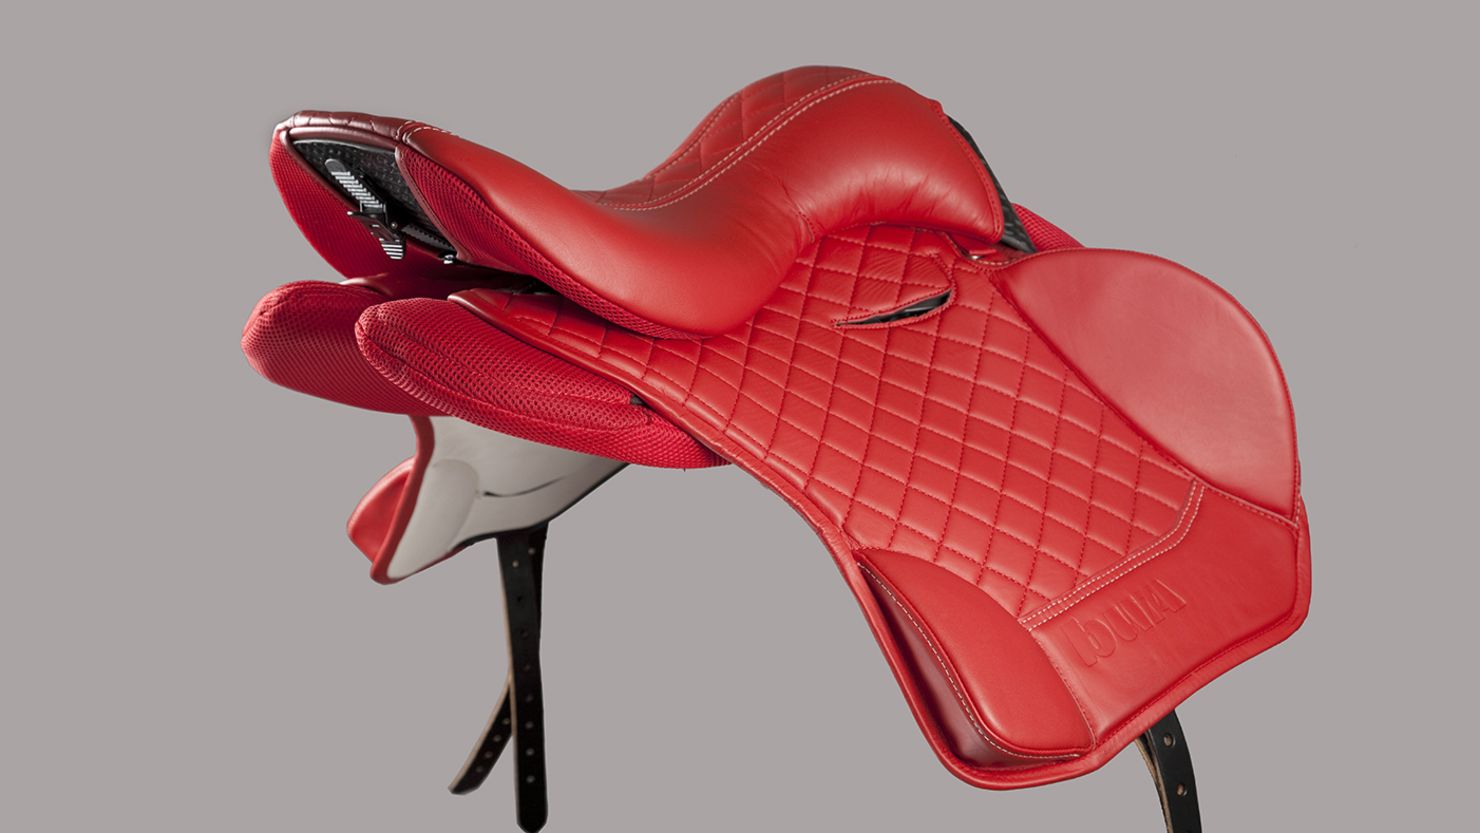 This Bua saddles is the latest in an evolutionary line stretching back over 2,000 years. 